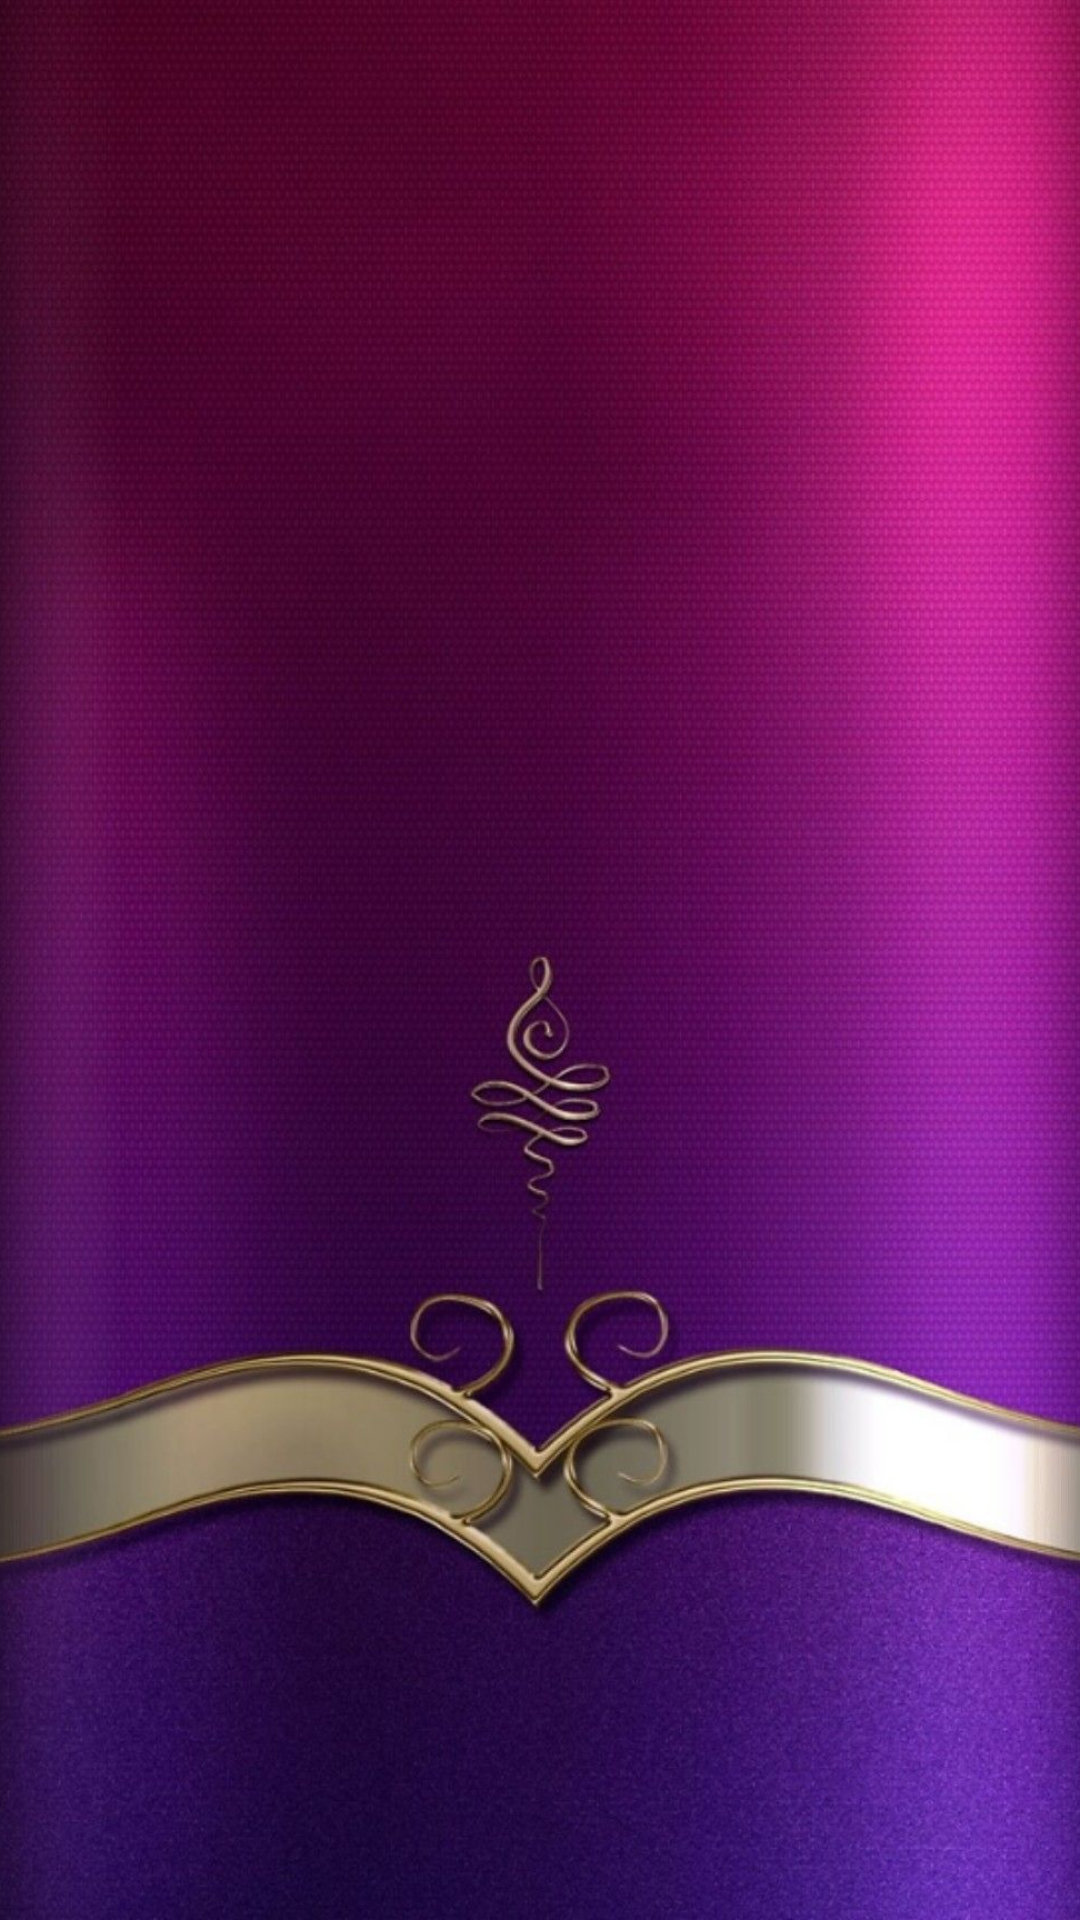 1080x1920 Pink and gold Purple and gold | Gold wallpaper iphone, Samsung wallpaper, Bling wallpaper